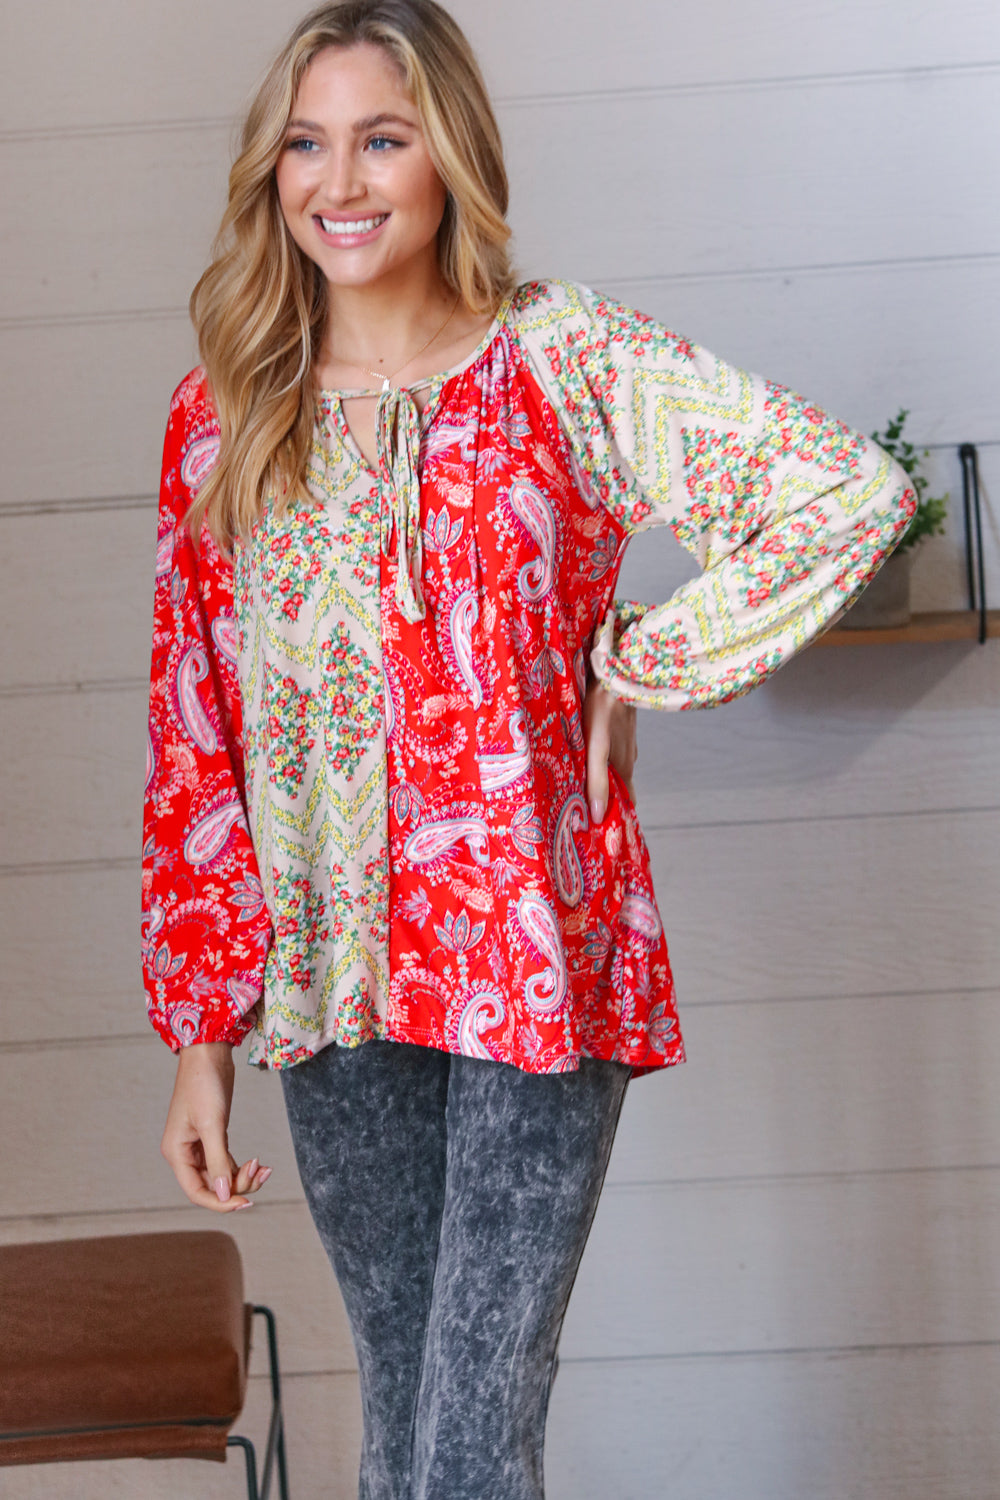 Amazing Day - Paisley and Floral Top